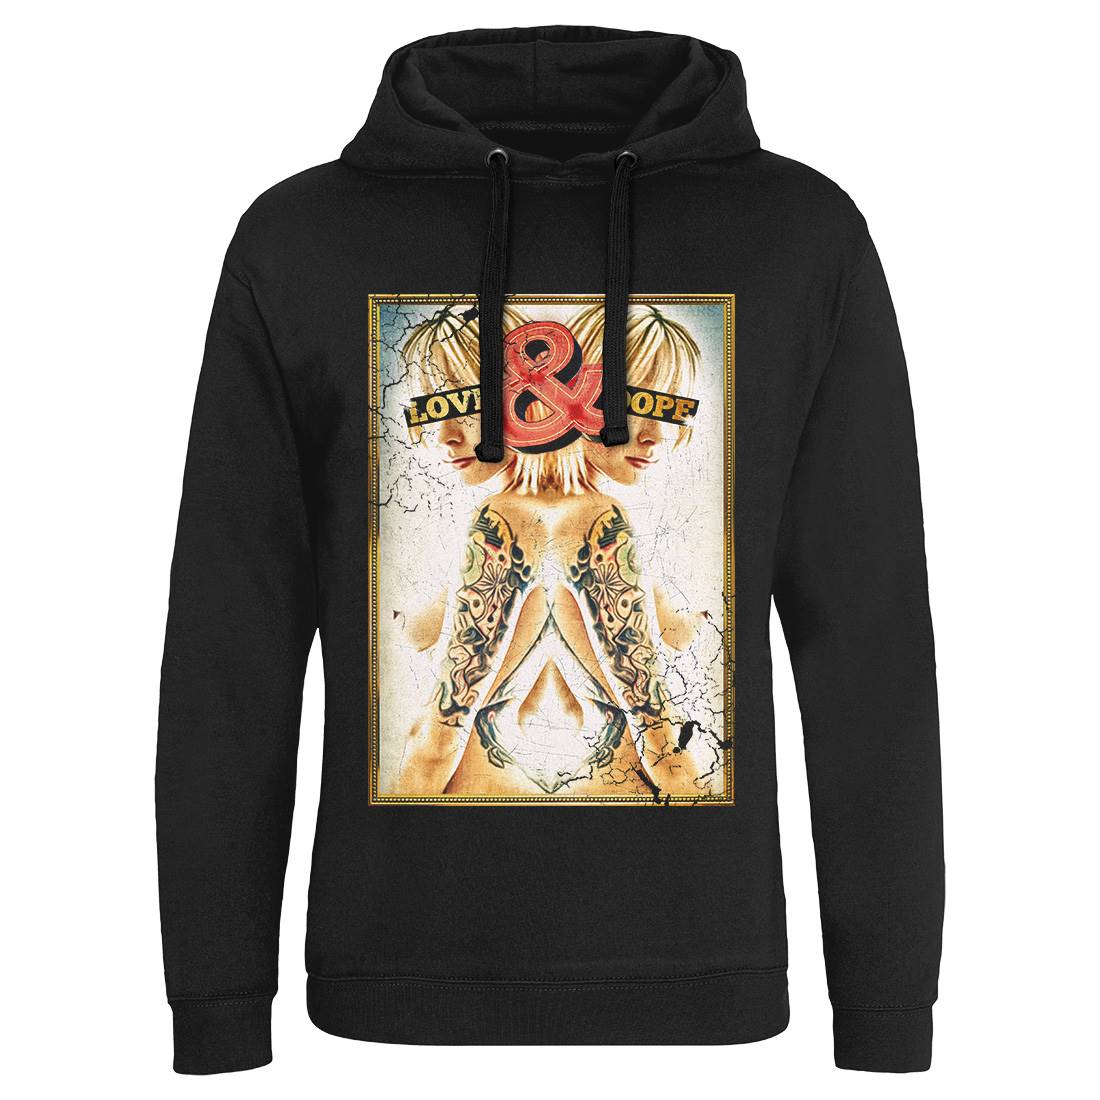 Love And Dope Mens Hoodie Without Pocket Drugs A869